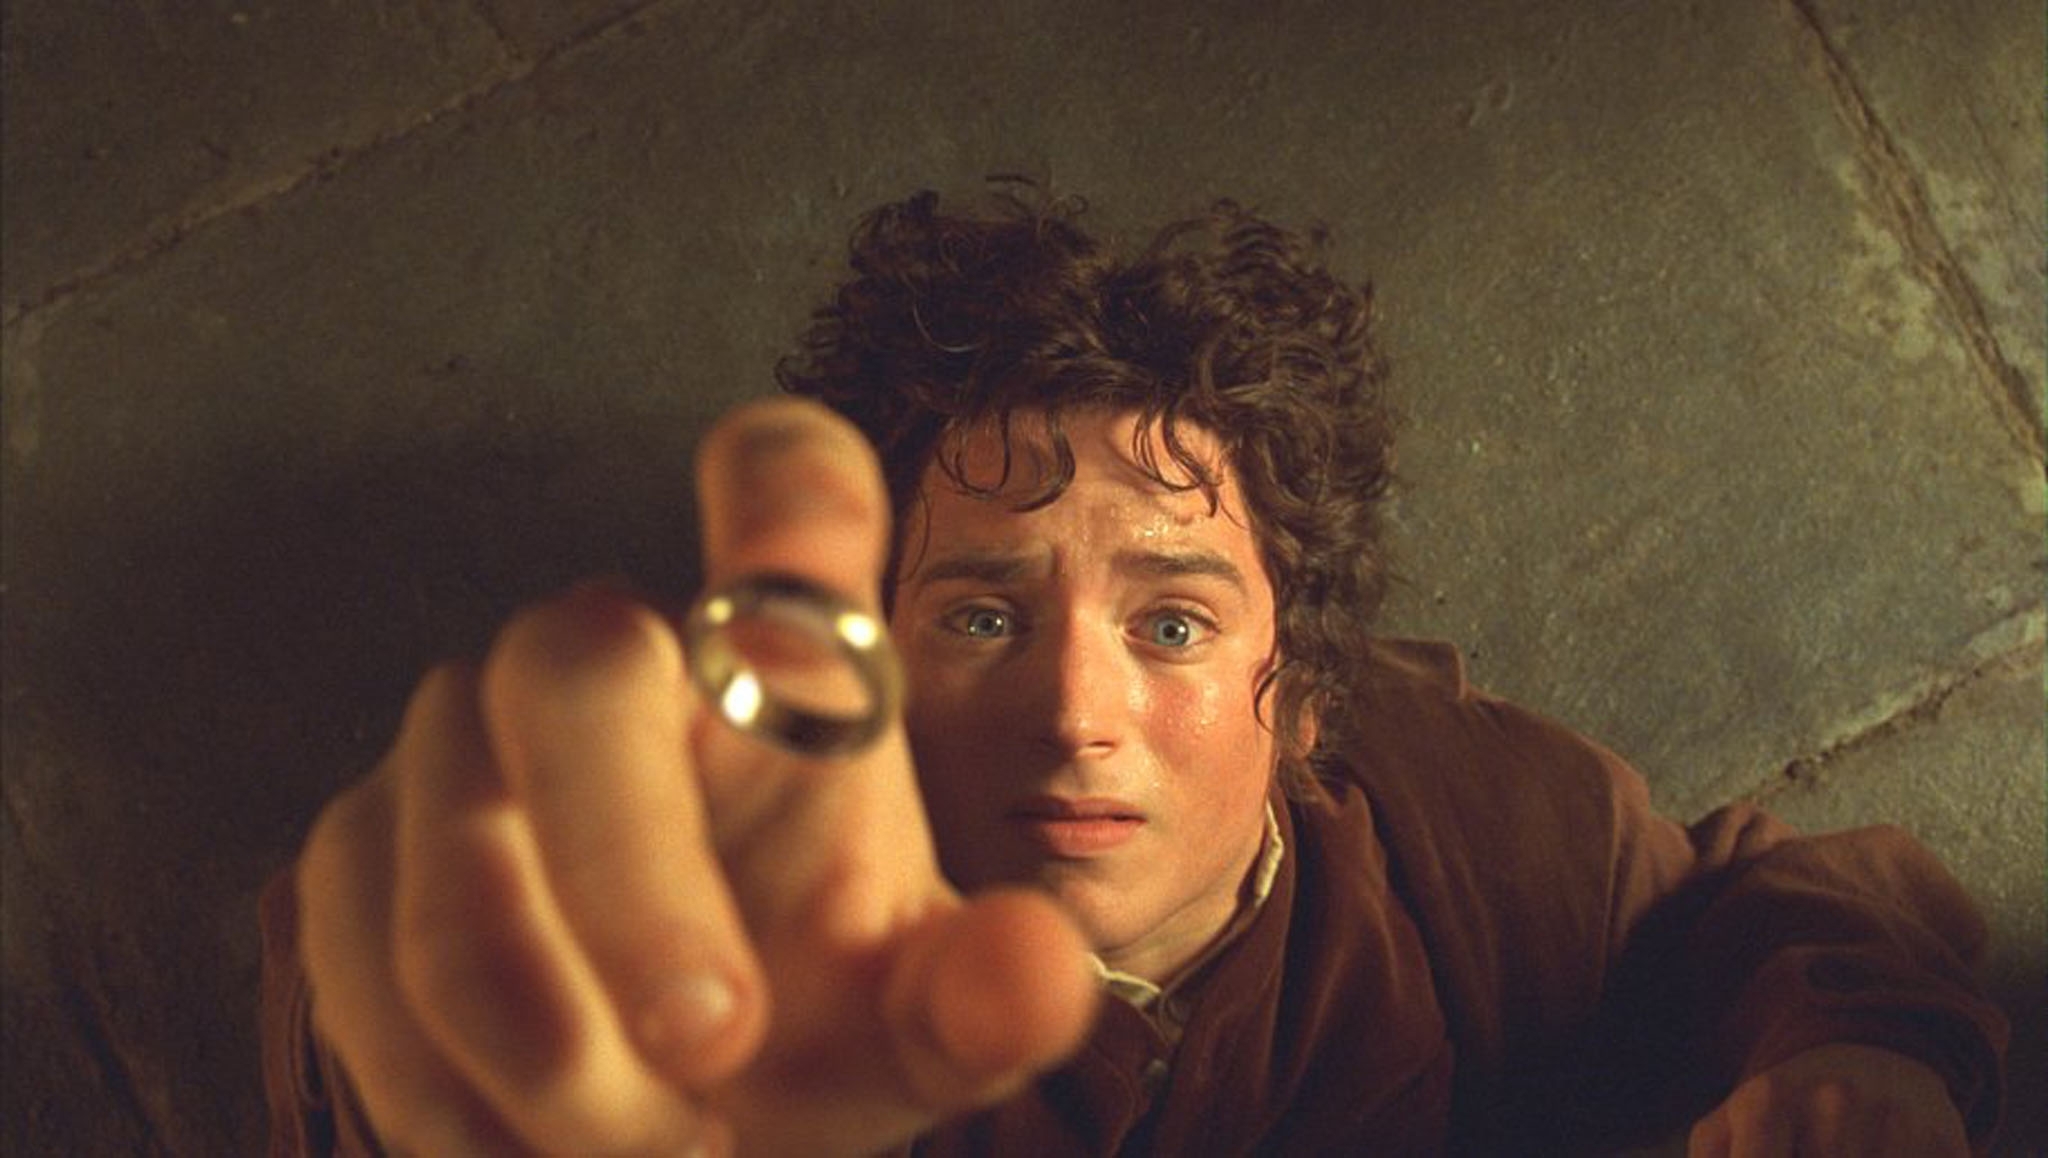 the-lord-of-the-rings-the-fellowship-of-the-ring-hd-movie-2001-2_1.jpg